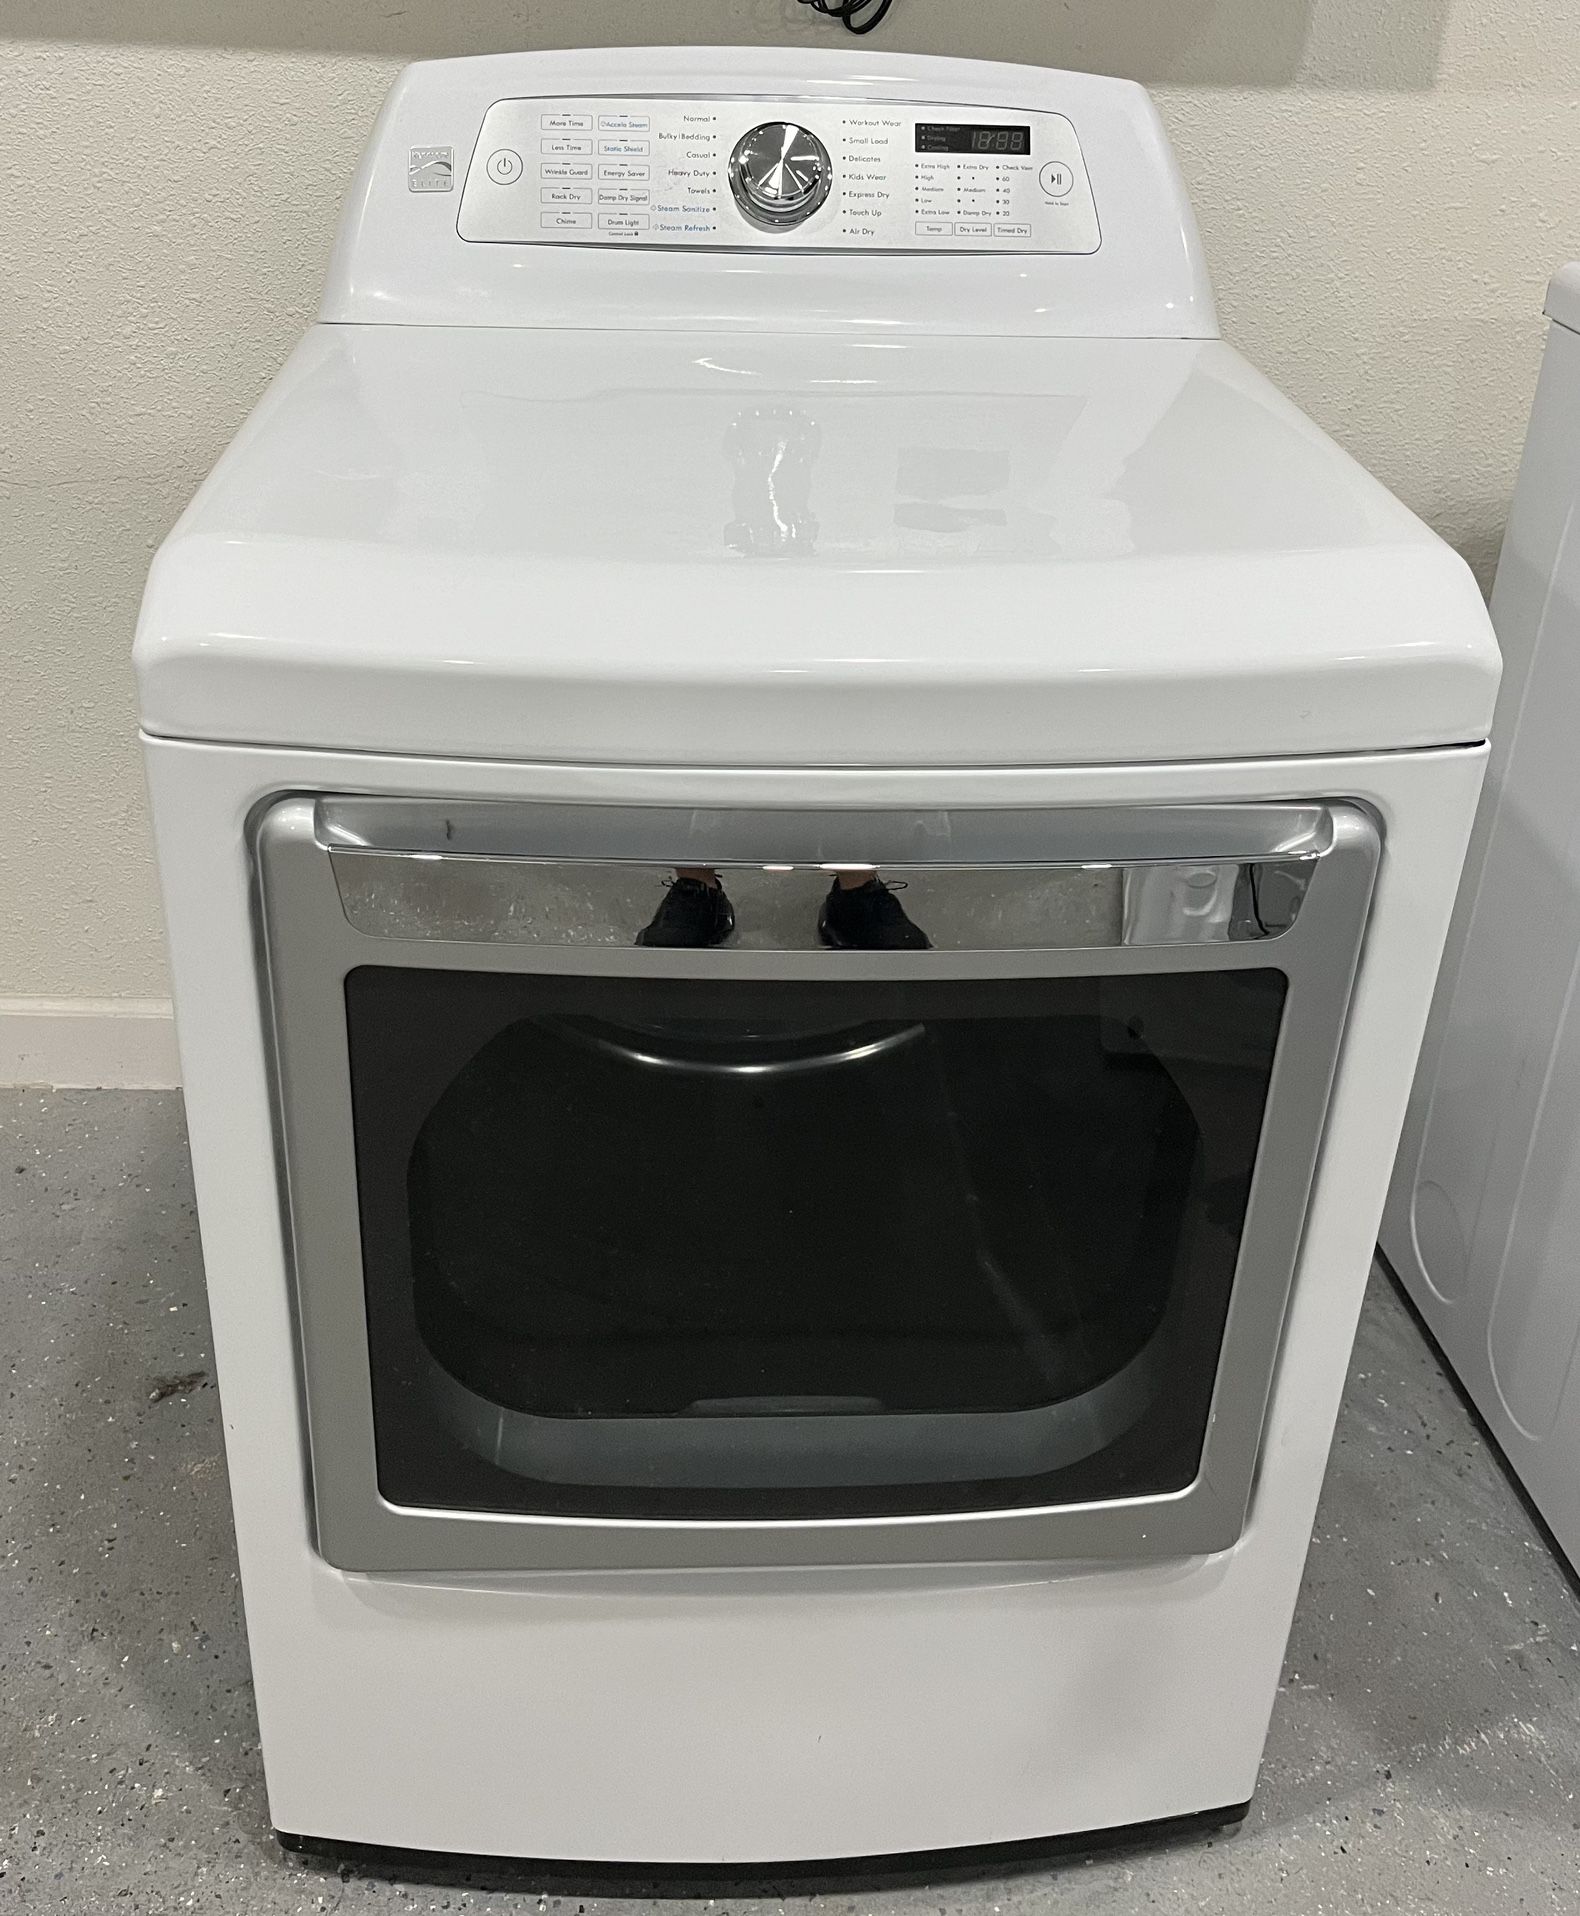 Kenmore Electric Dryer In Great Working Condition. No Issues Works Good.